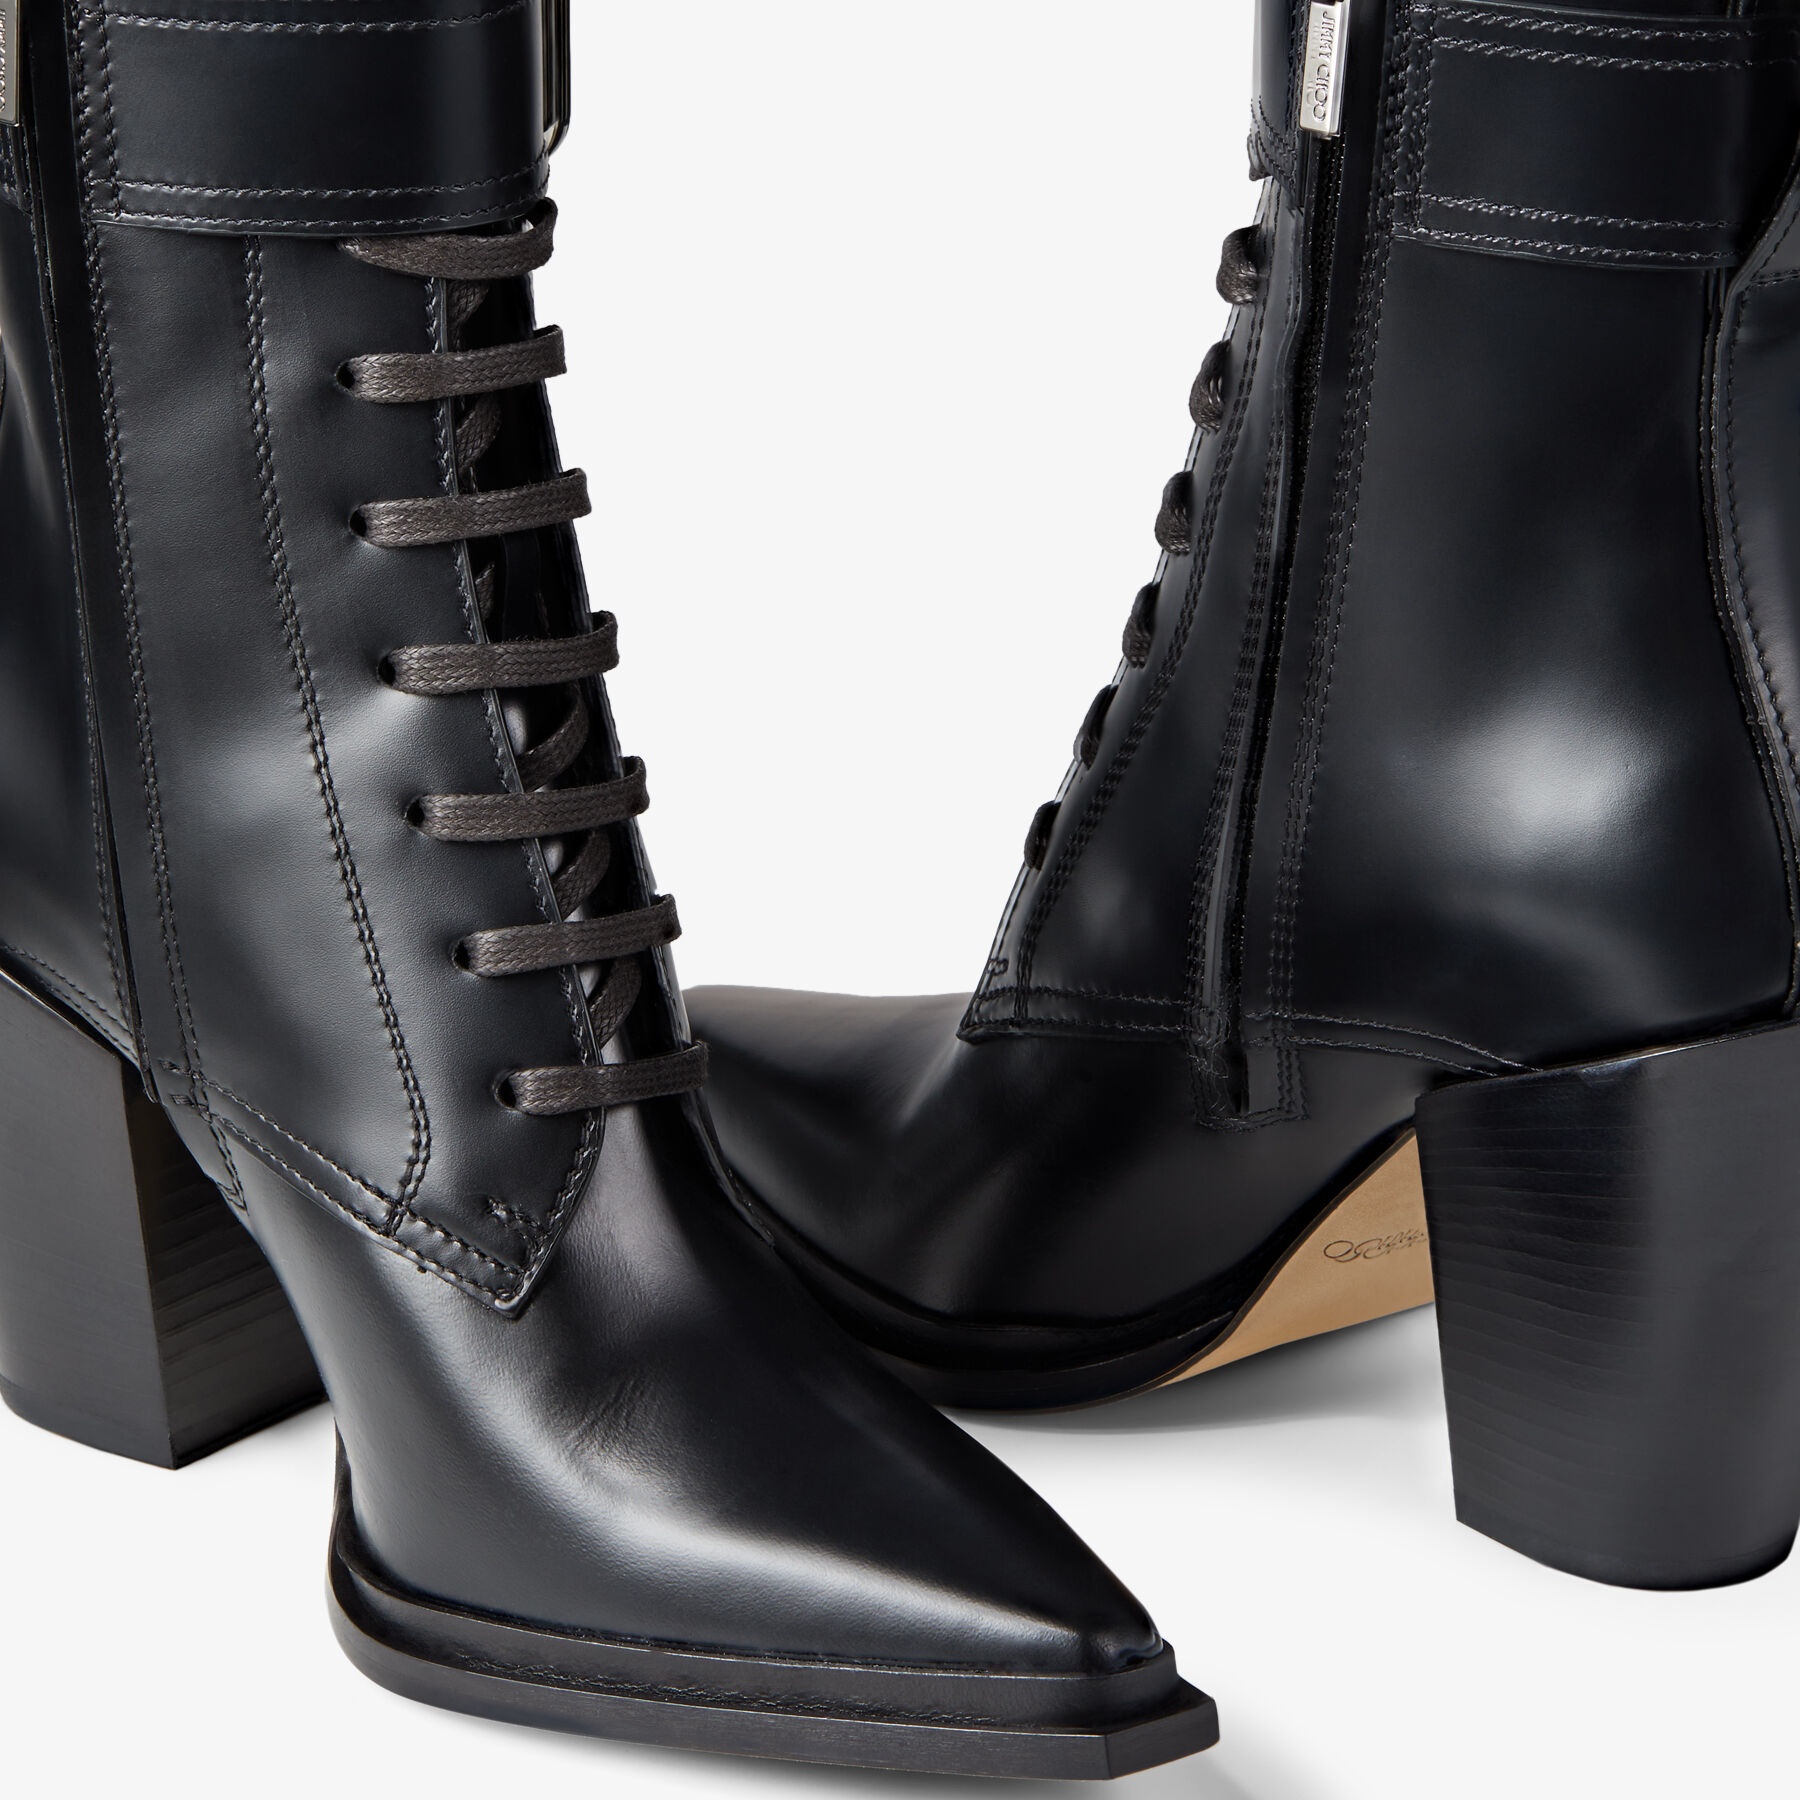 Myos 80
Black Brushed Calf Leather Ankle Boots - 4